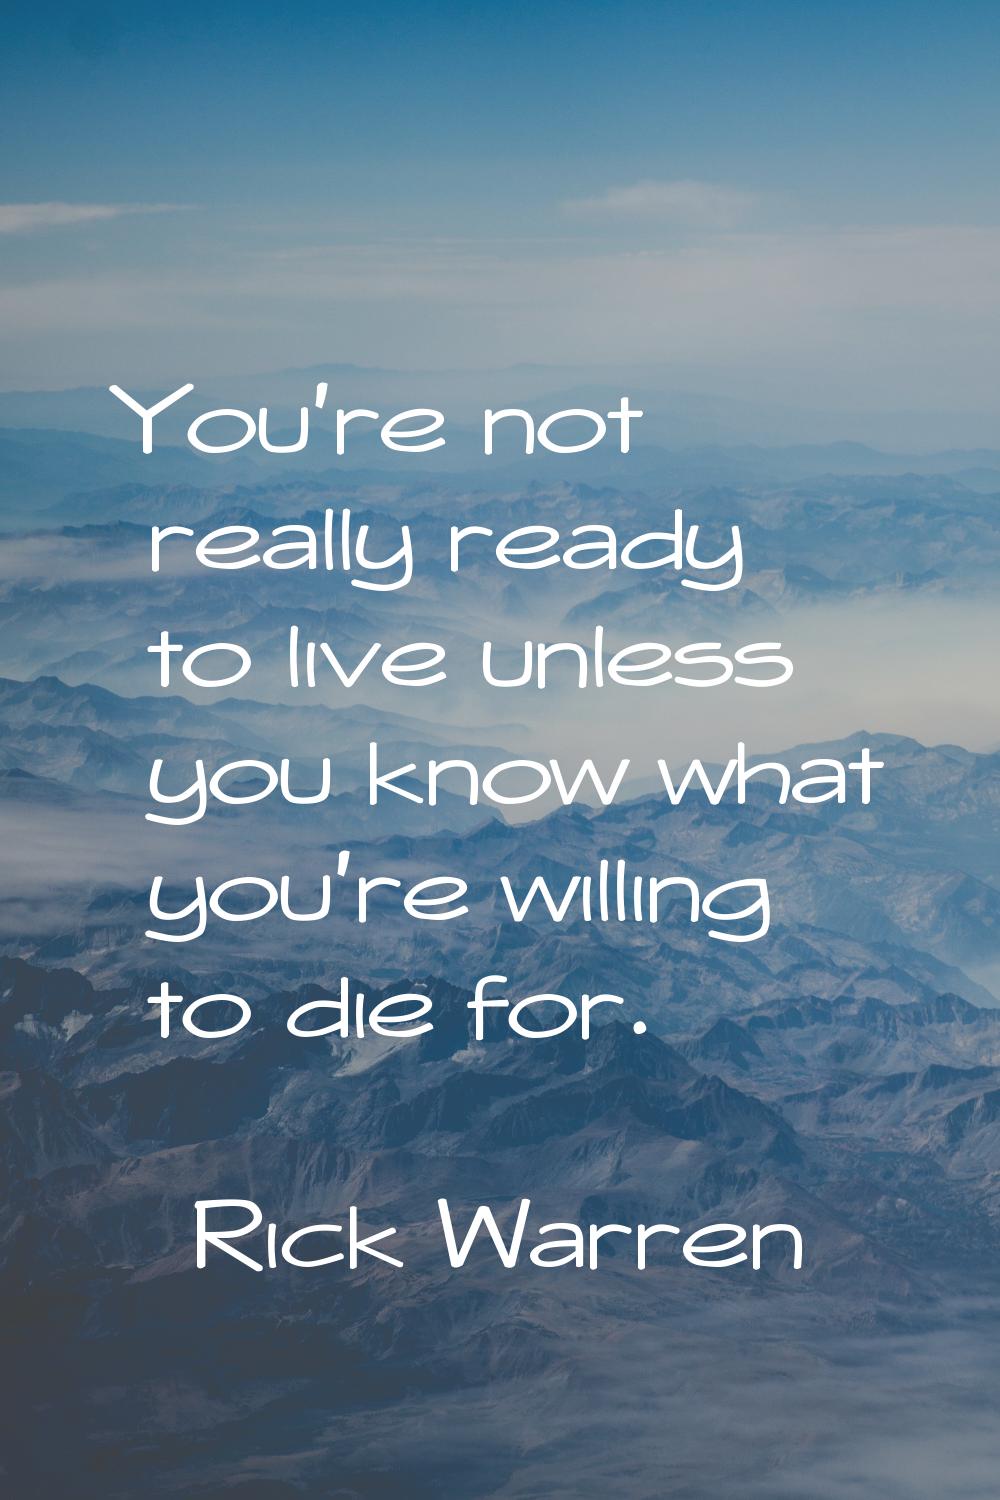 You're not really ready to live unless you know what you're willing to die for.